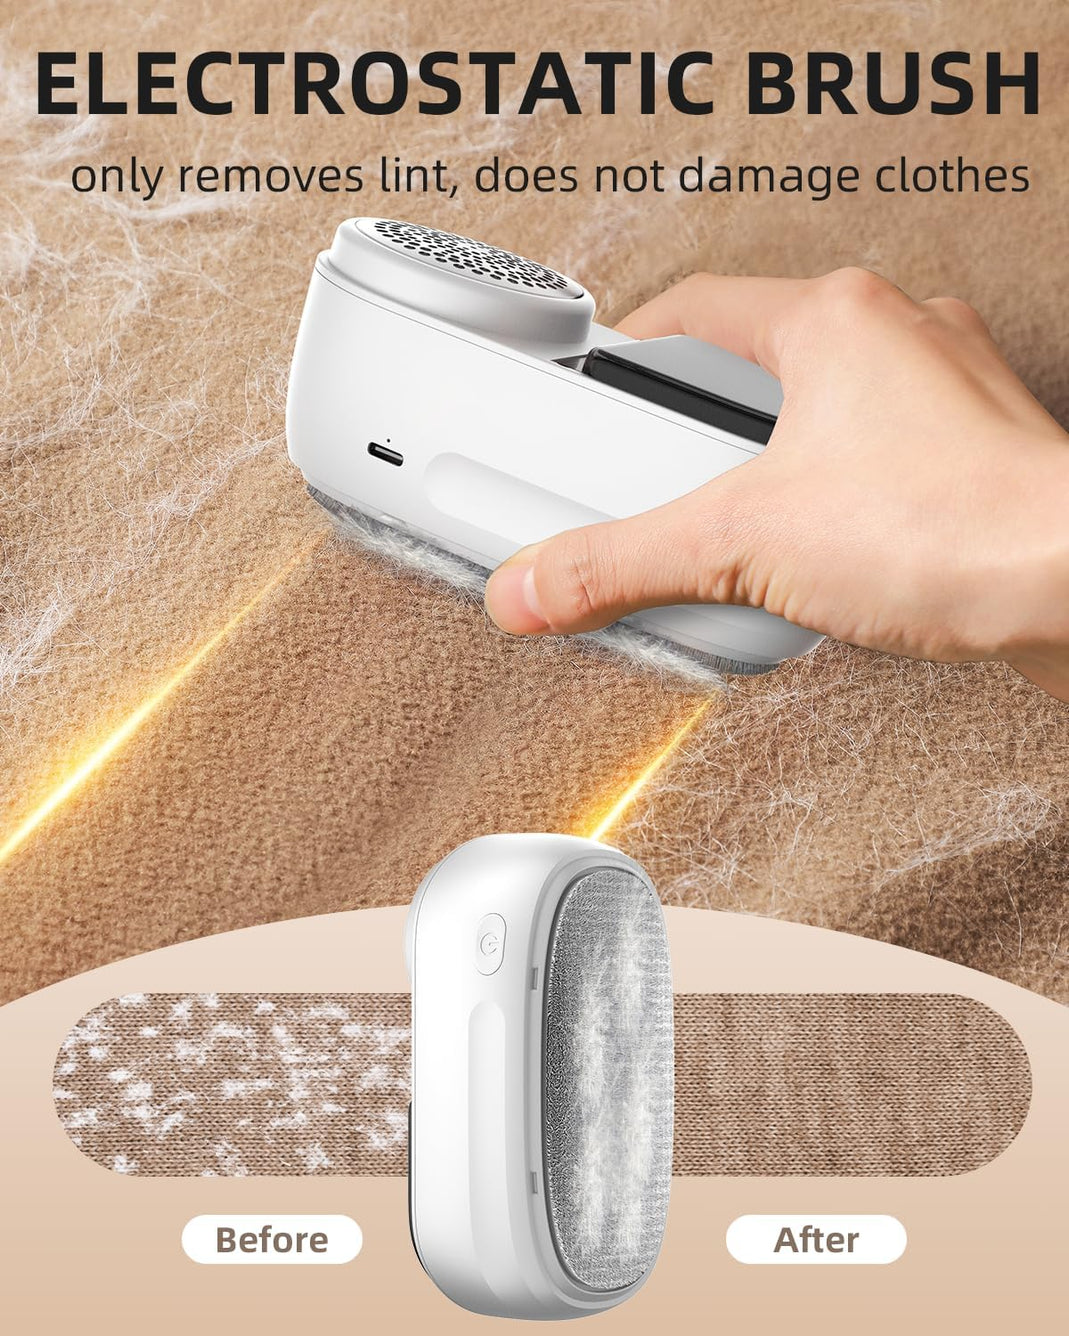 Fabric Shaver, 2600 Mah Rechargeable Lint Remover, Sweater Shaver with Lint Brush, Sweater Defuzzer to Remove Pilling, Large Capacity Lint Storage, Portable Fabric Shaver for Furniture, Clothes